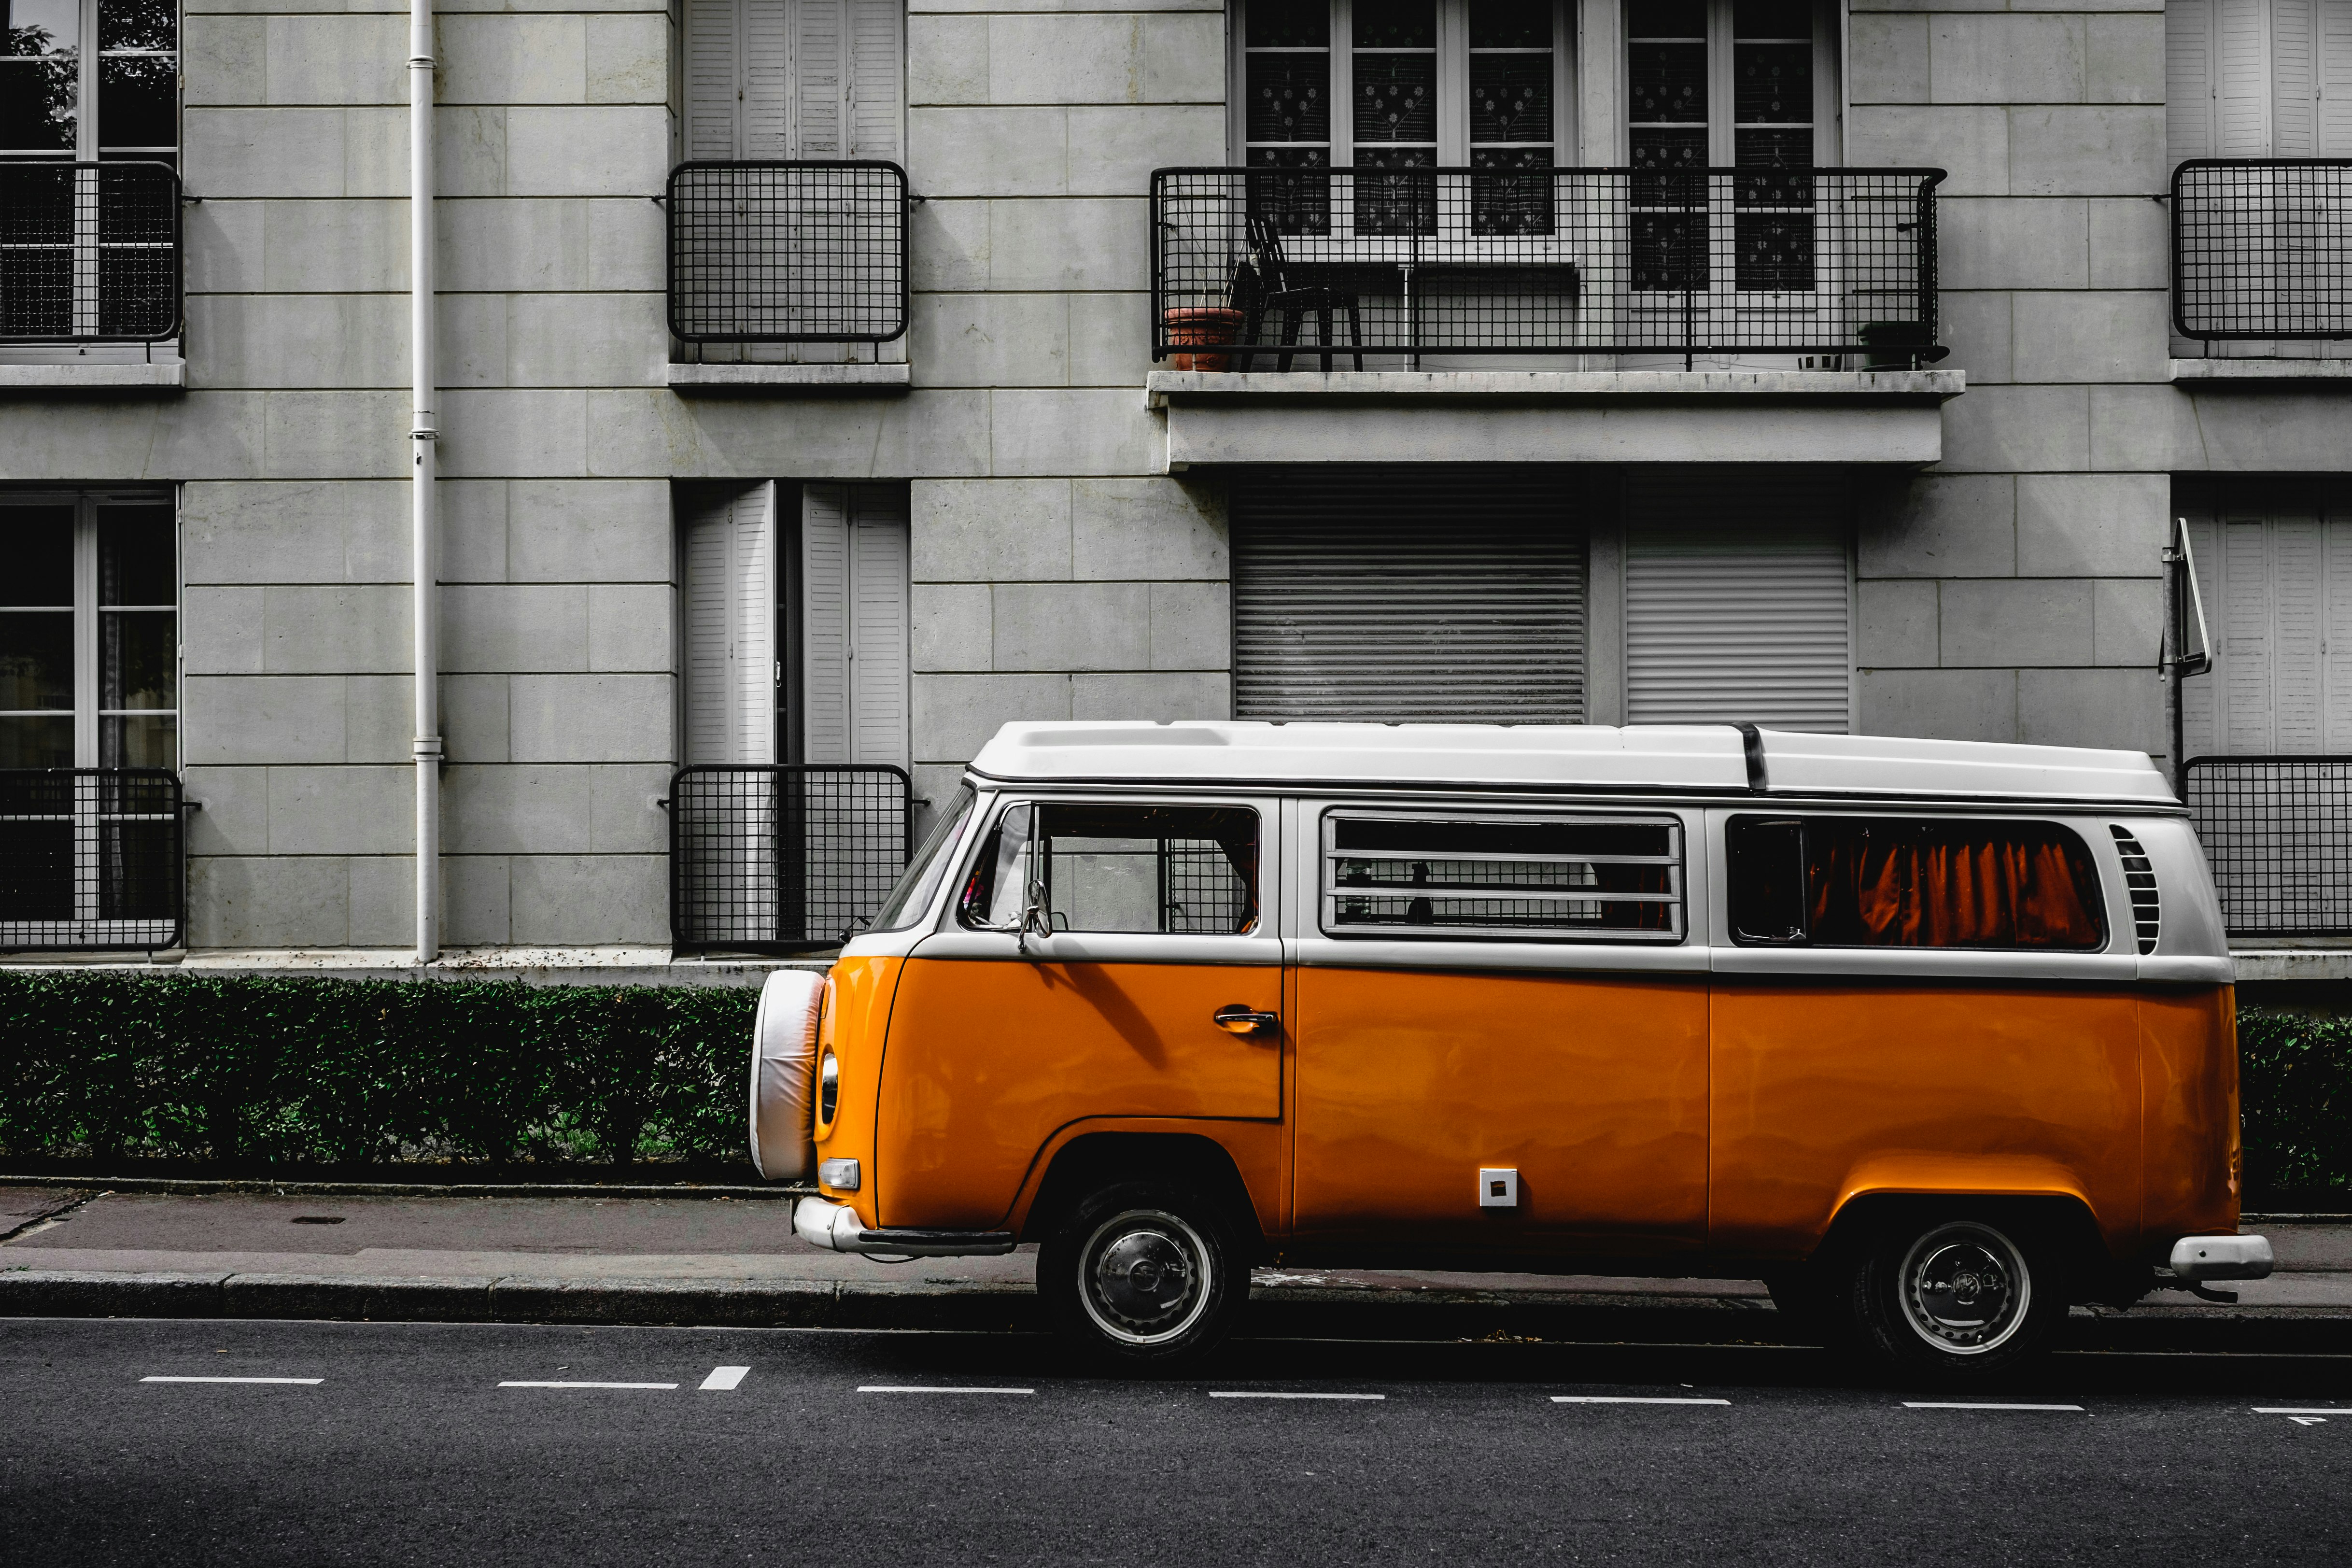 I spotted this beautiful orange Volkswagen in the streets of Caen, France.